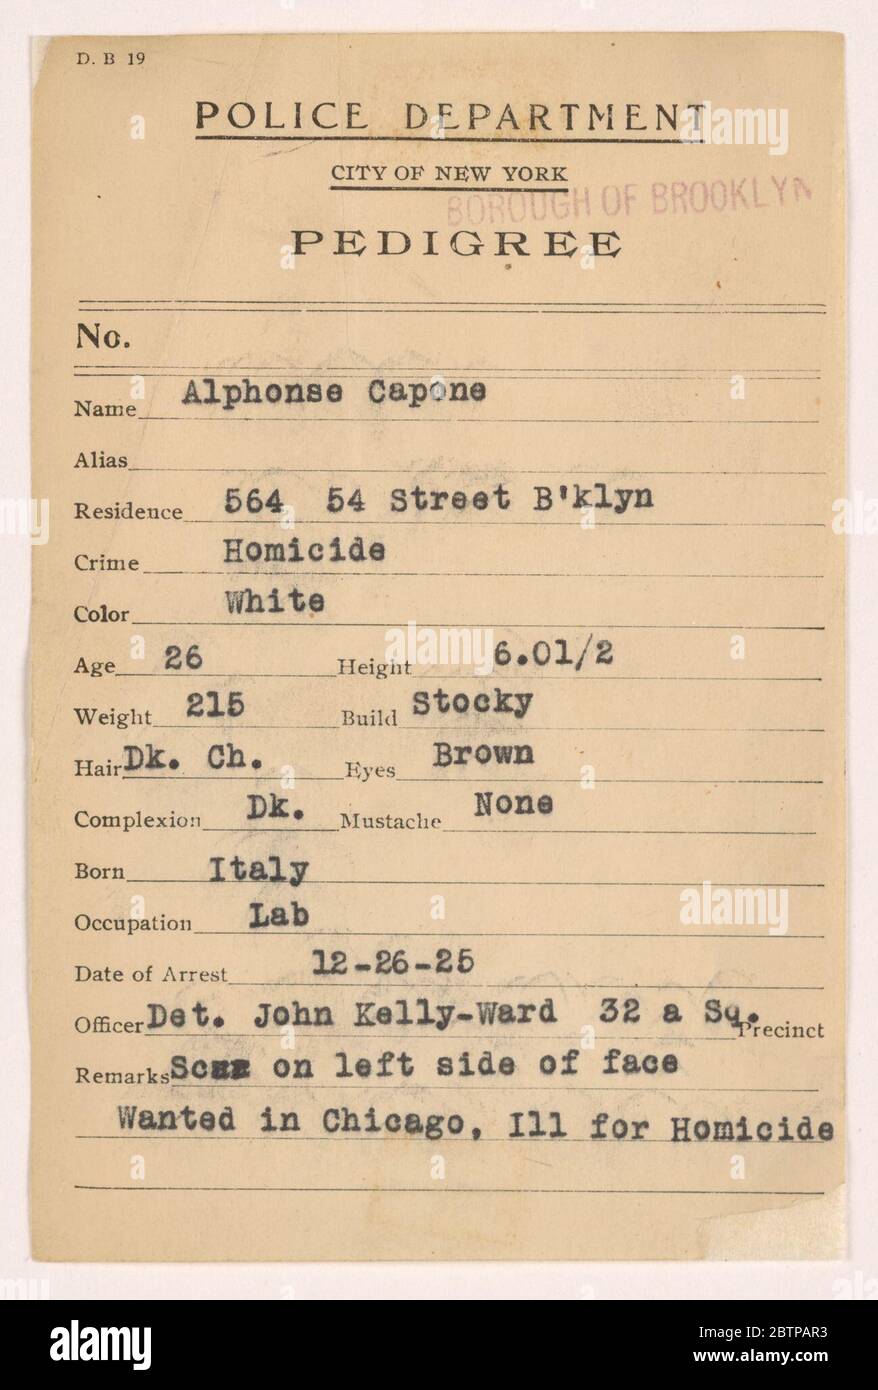 Police Pedigree Document for Alphonse Capone. Al Capone-'Scarface'-the most notorious gangster of the 1920s, was a bootlegger in Chicago, a city whose violent 'beer wars' during prohibition made it the symbol of organized crime in America. Stock Photo